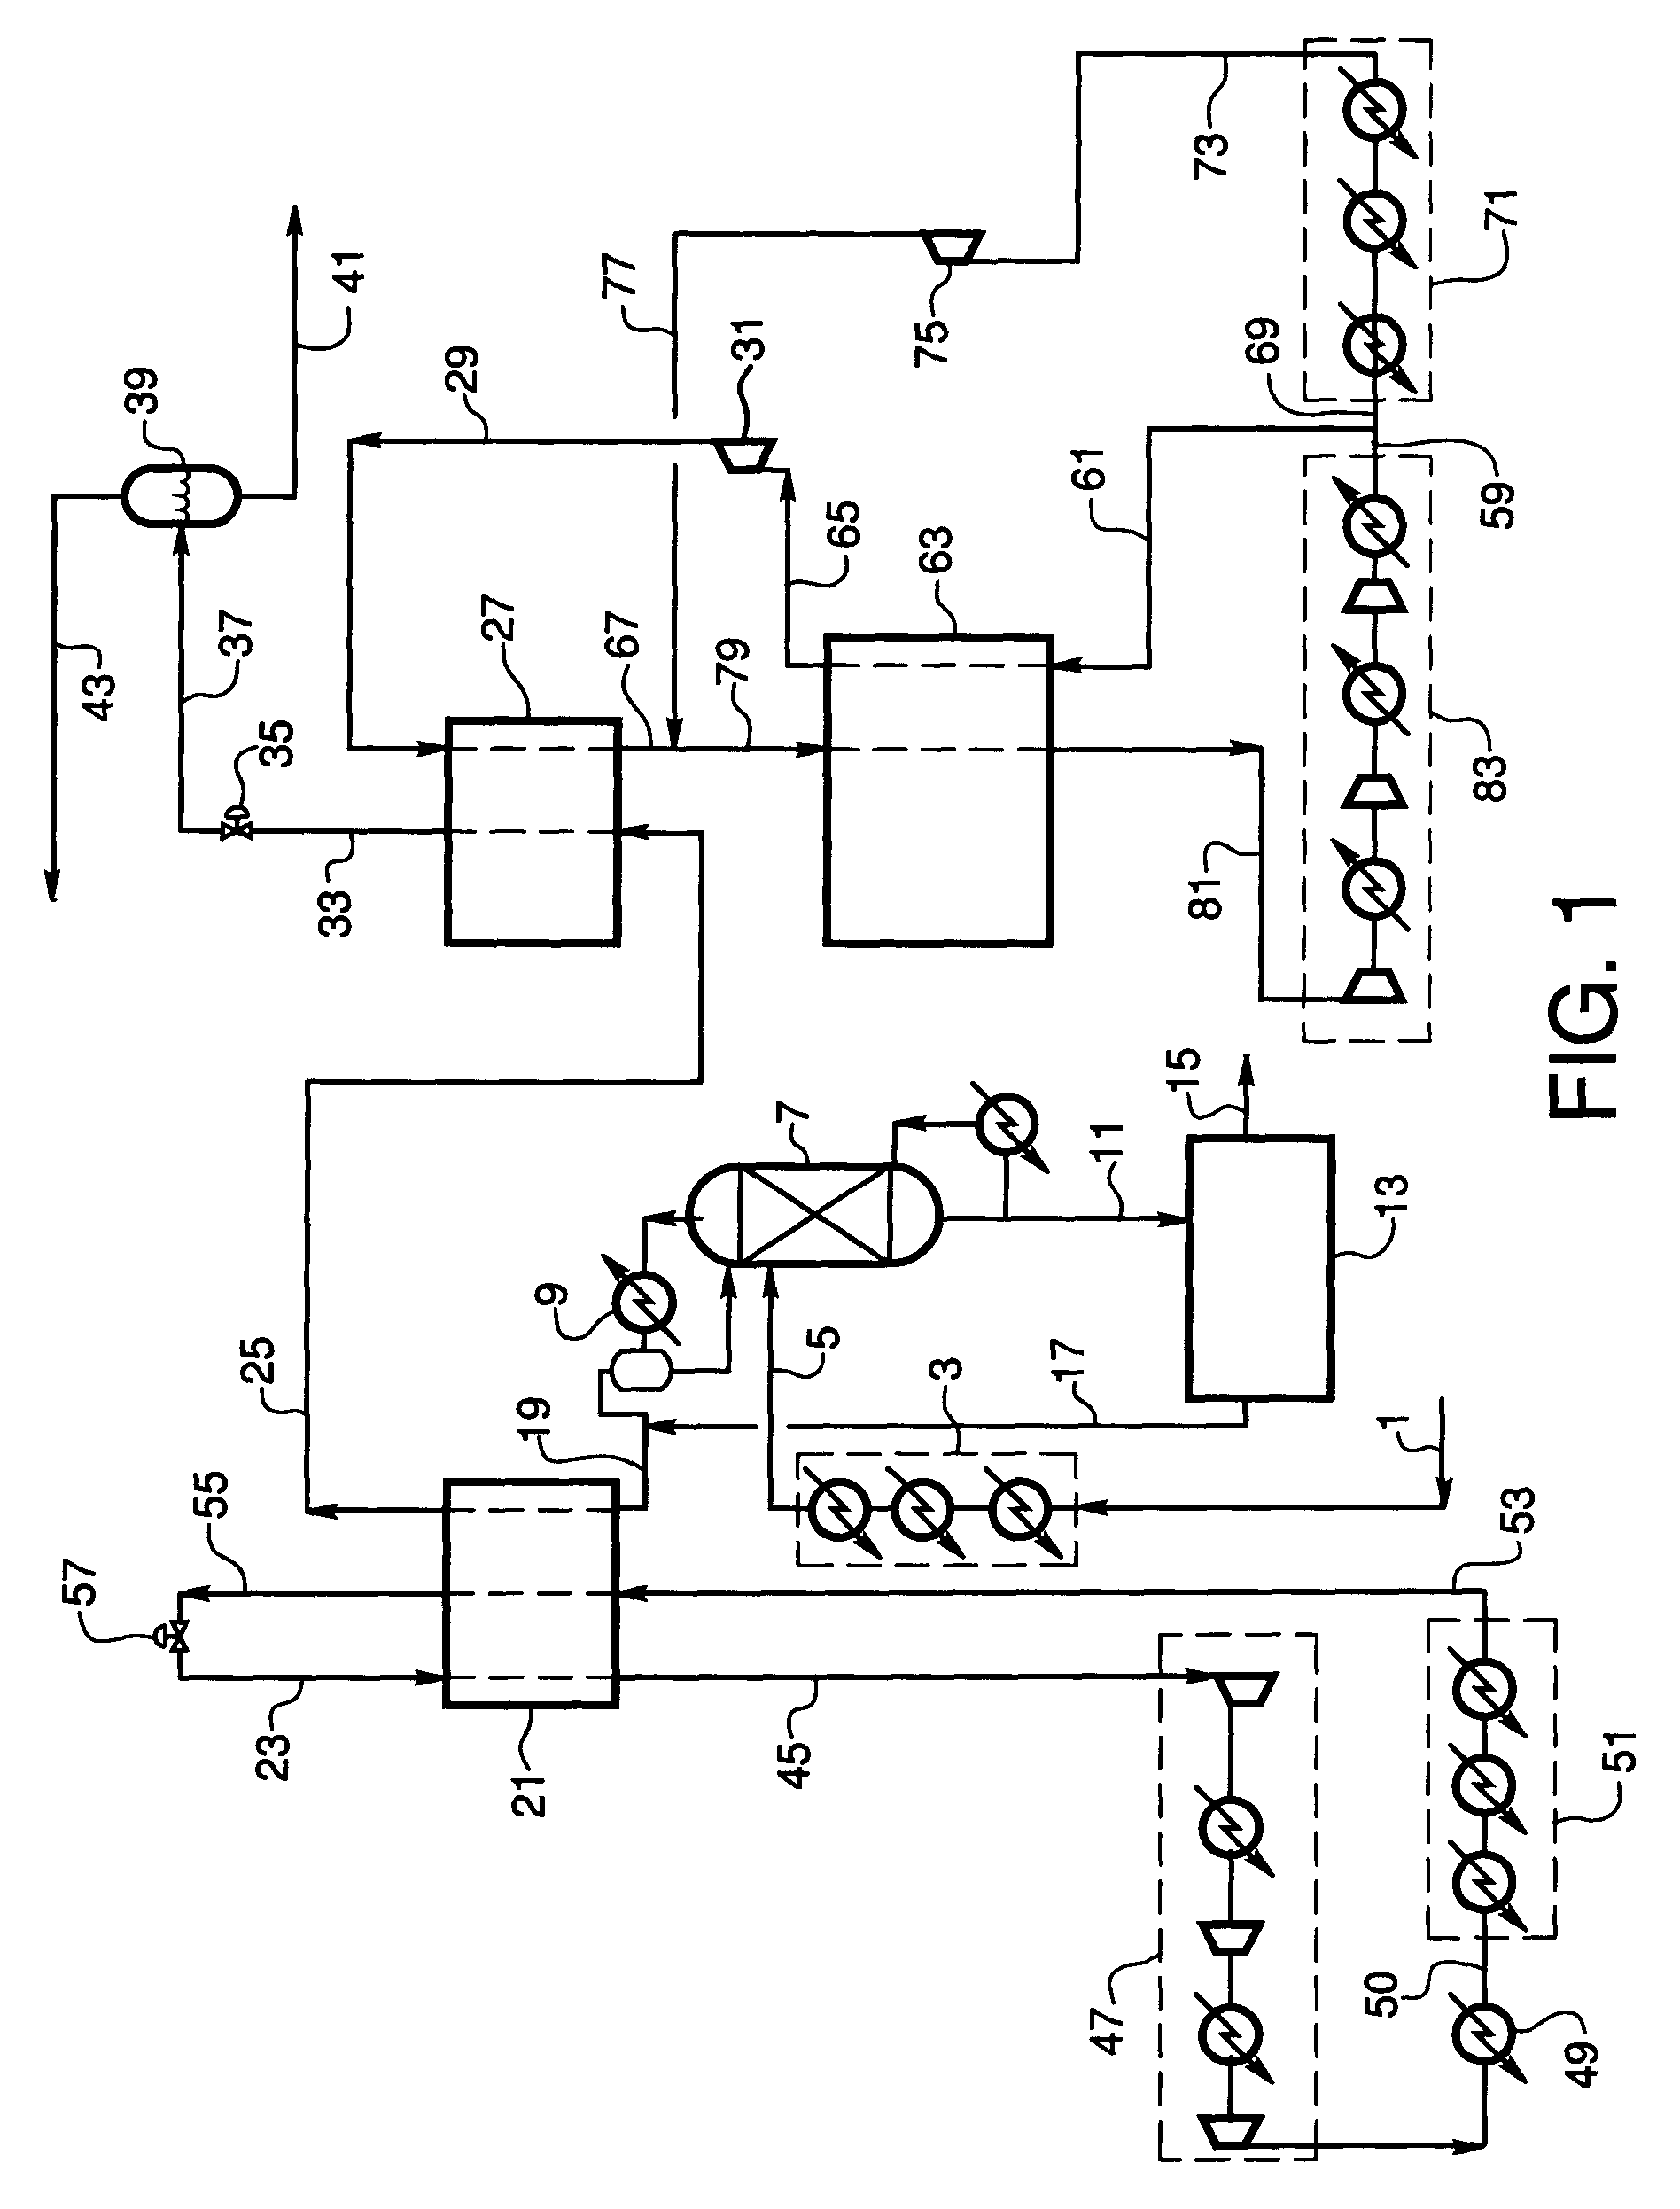 Hybrid gas liquefaction cycle with multiple expanders